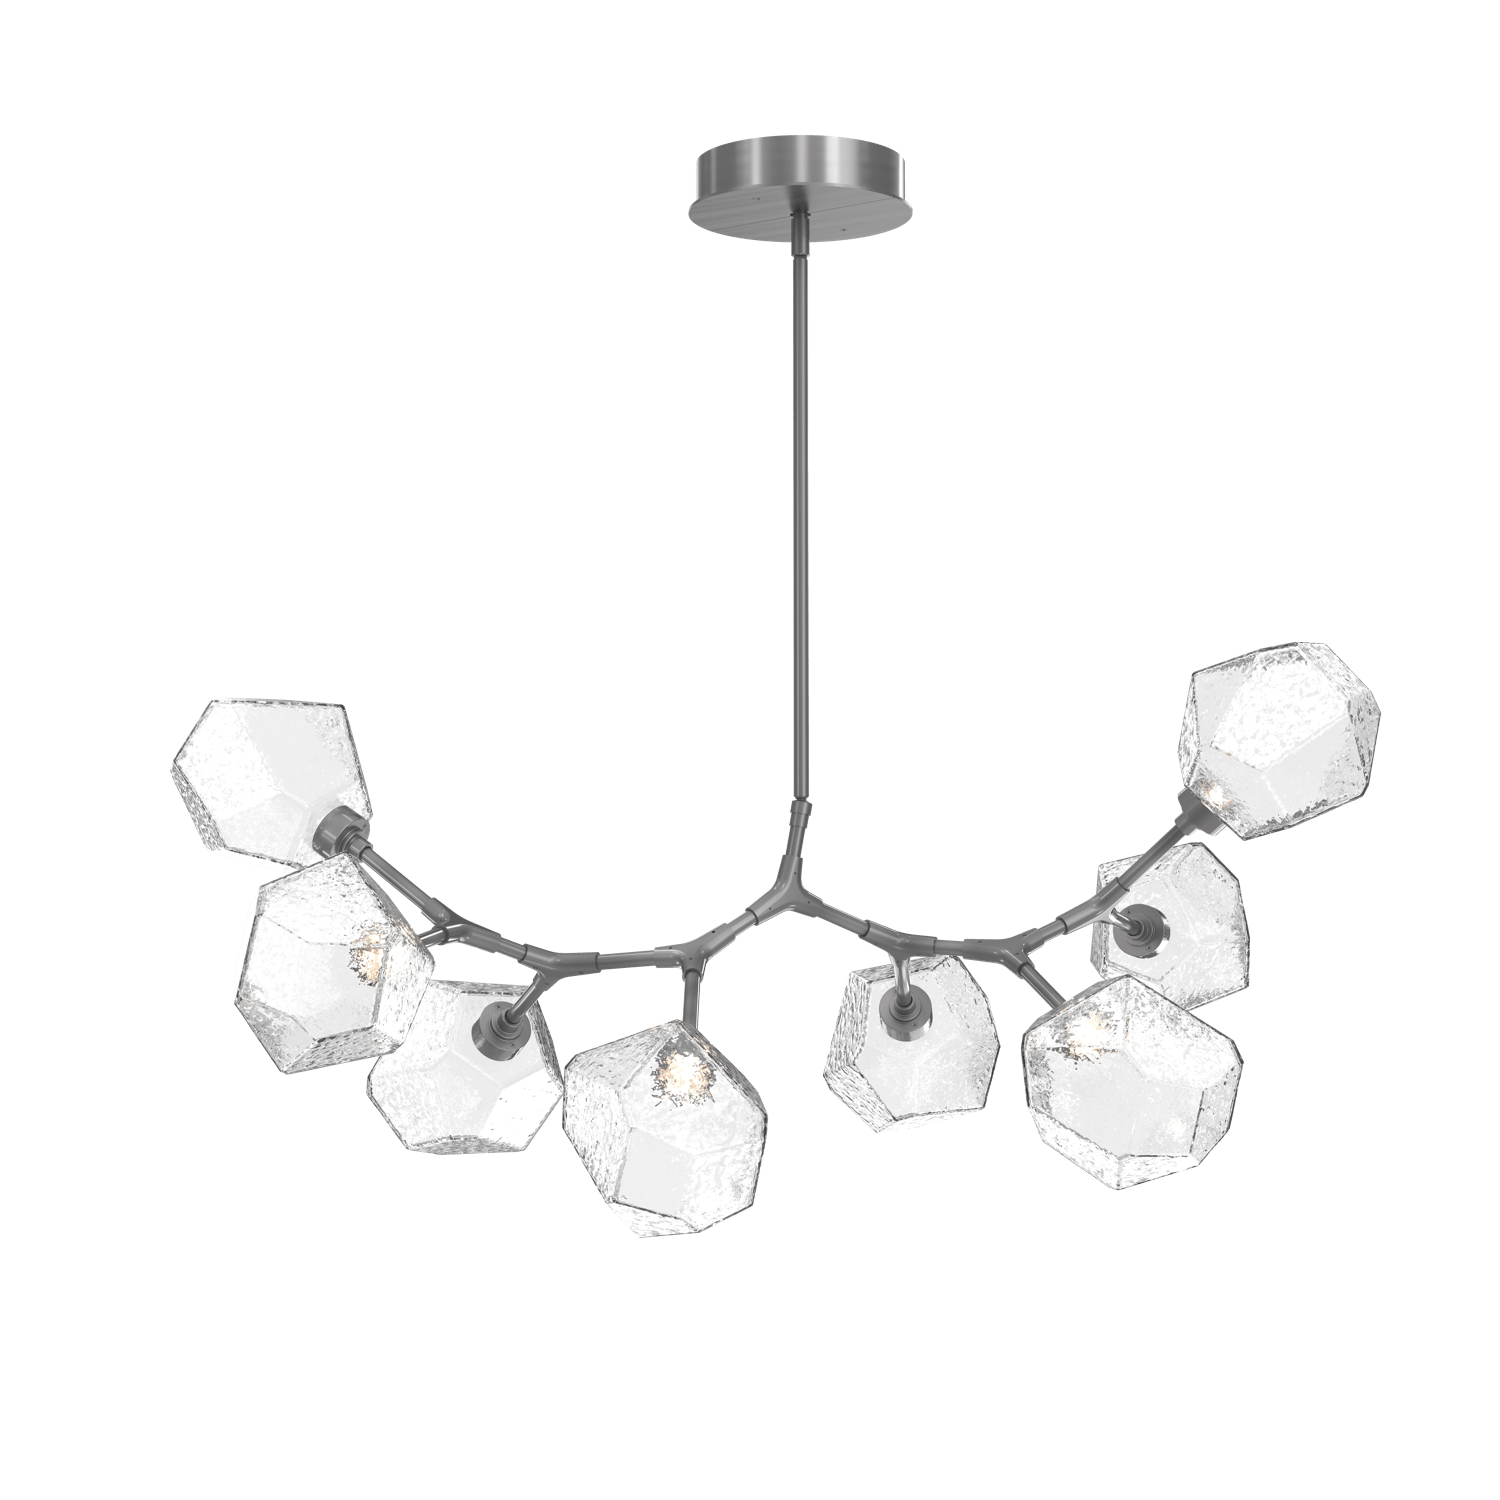 PLB0039-BB-SN-C-Hammerton-Studio-Gem-8-light-modern-branch-chandelier-with-satin-nickel-finish-and-clear-blown-glass-shades-and-LED-lamping